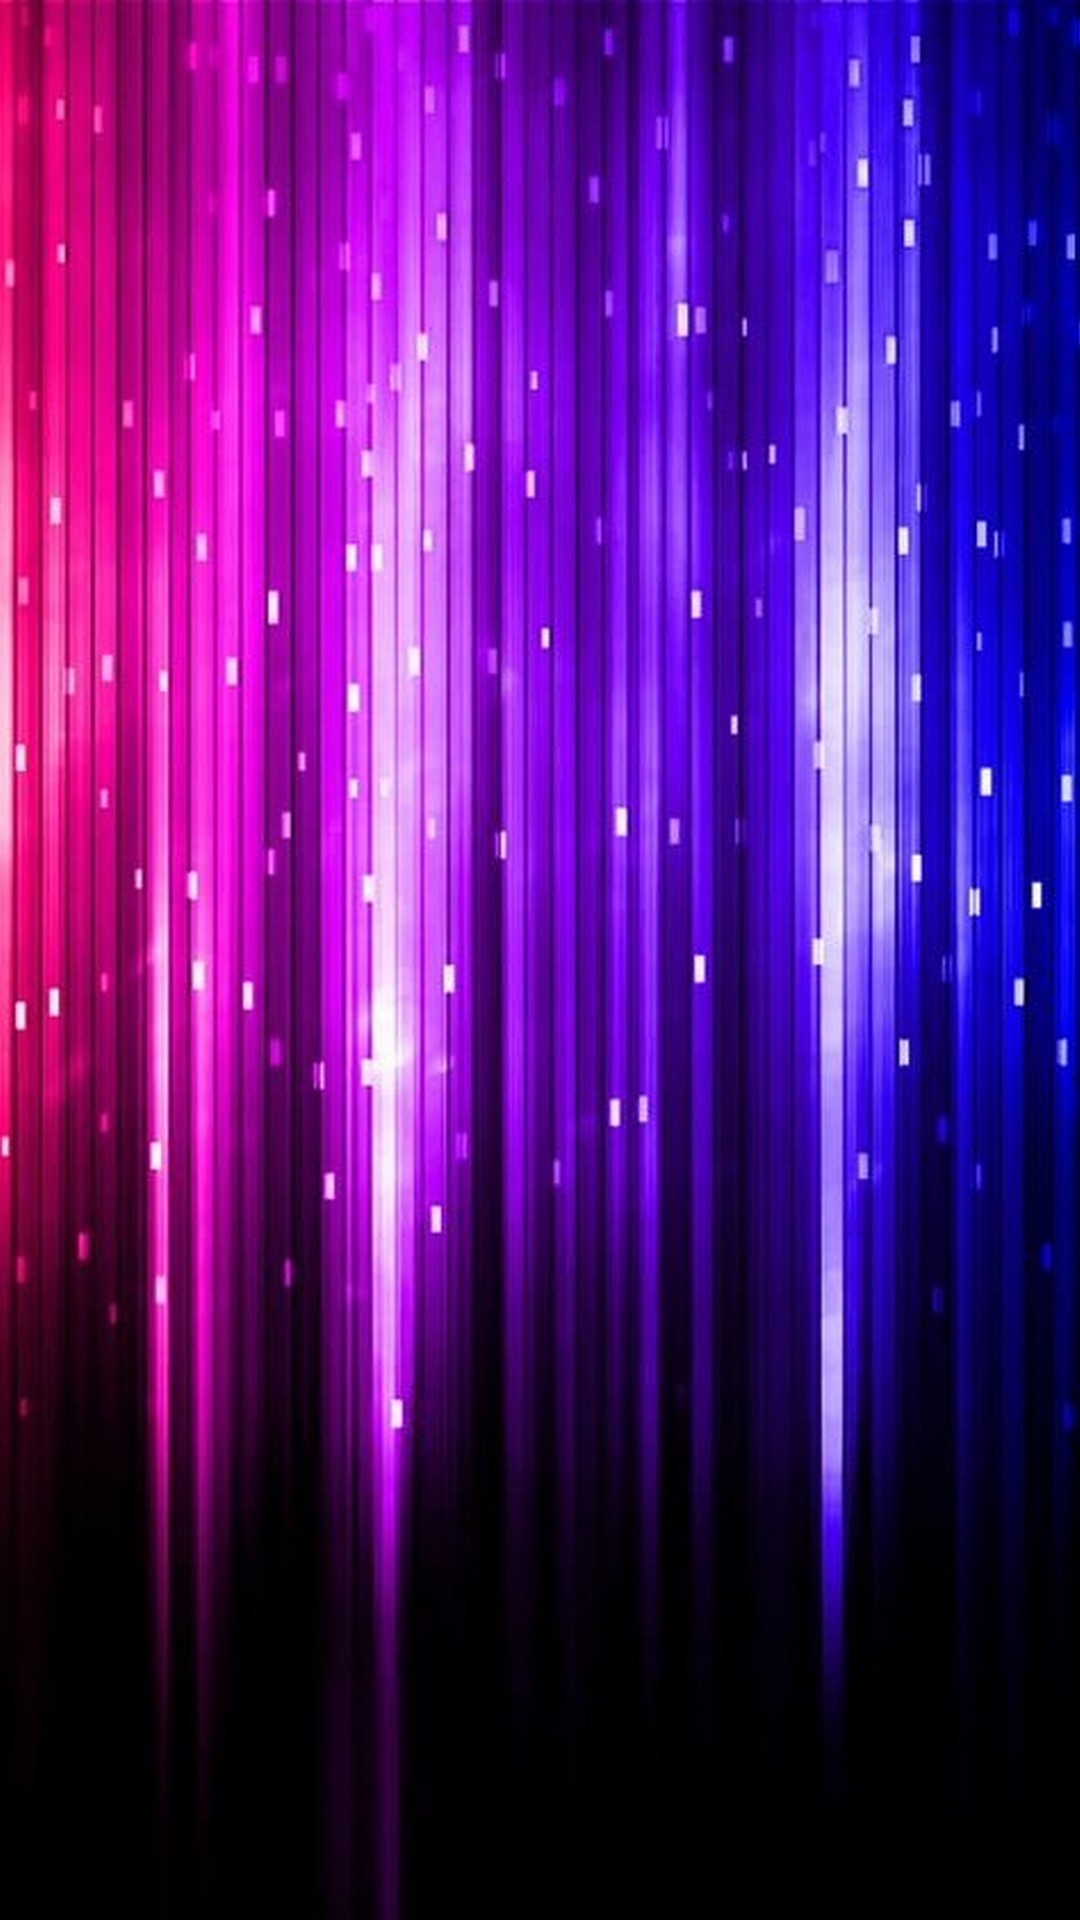 Blue and Purple Wallpaper iPhone resolution 1080x1920